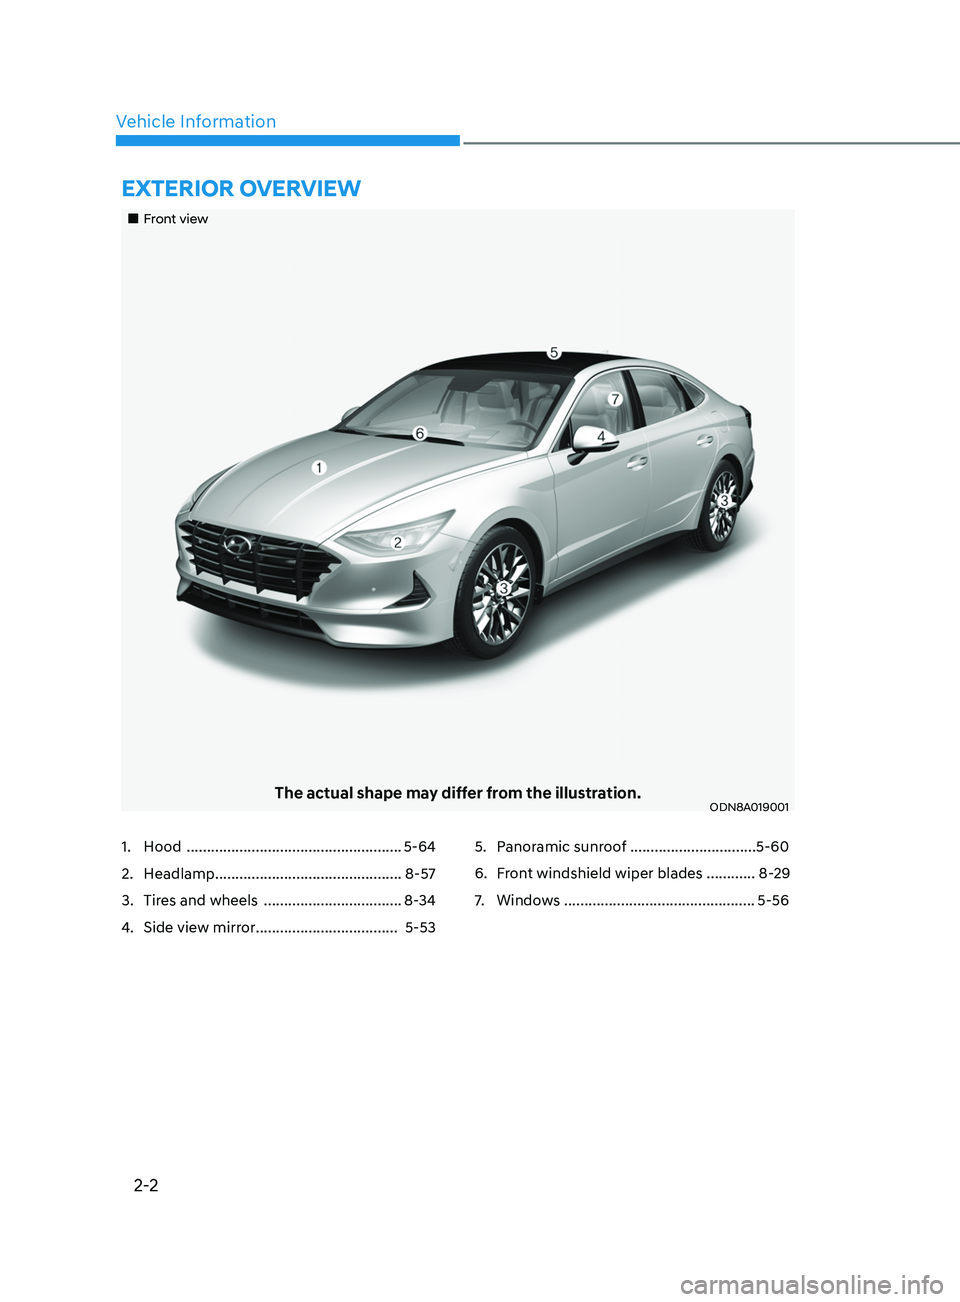 HYUNDAI SONATA 2021  Owners Manual 2-2
Vehicle Information
ExtErior ovE rvi E w
„„Front view
The actual shape may differ from the illustration.ODN8A019001
1. Hood  ..................................................... 5-64
2.